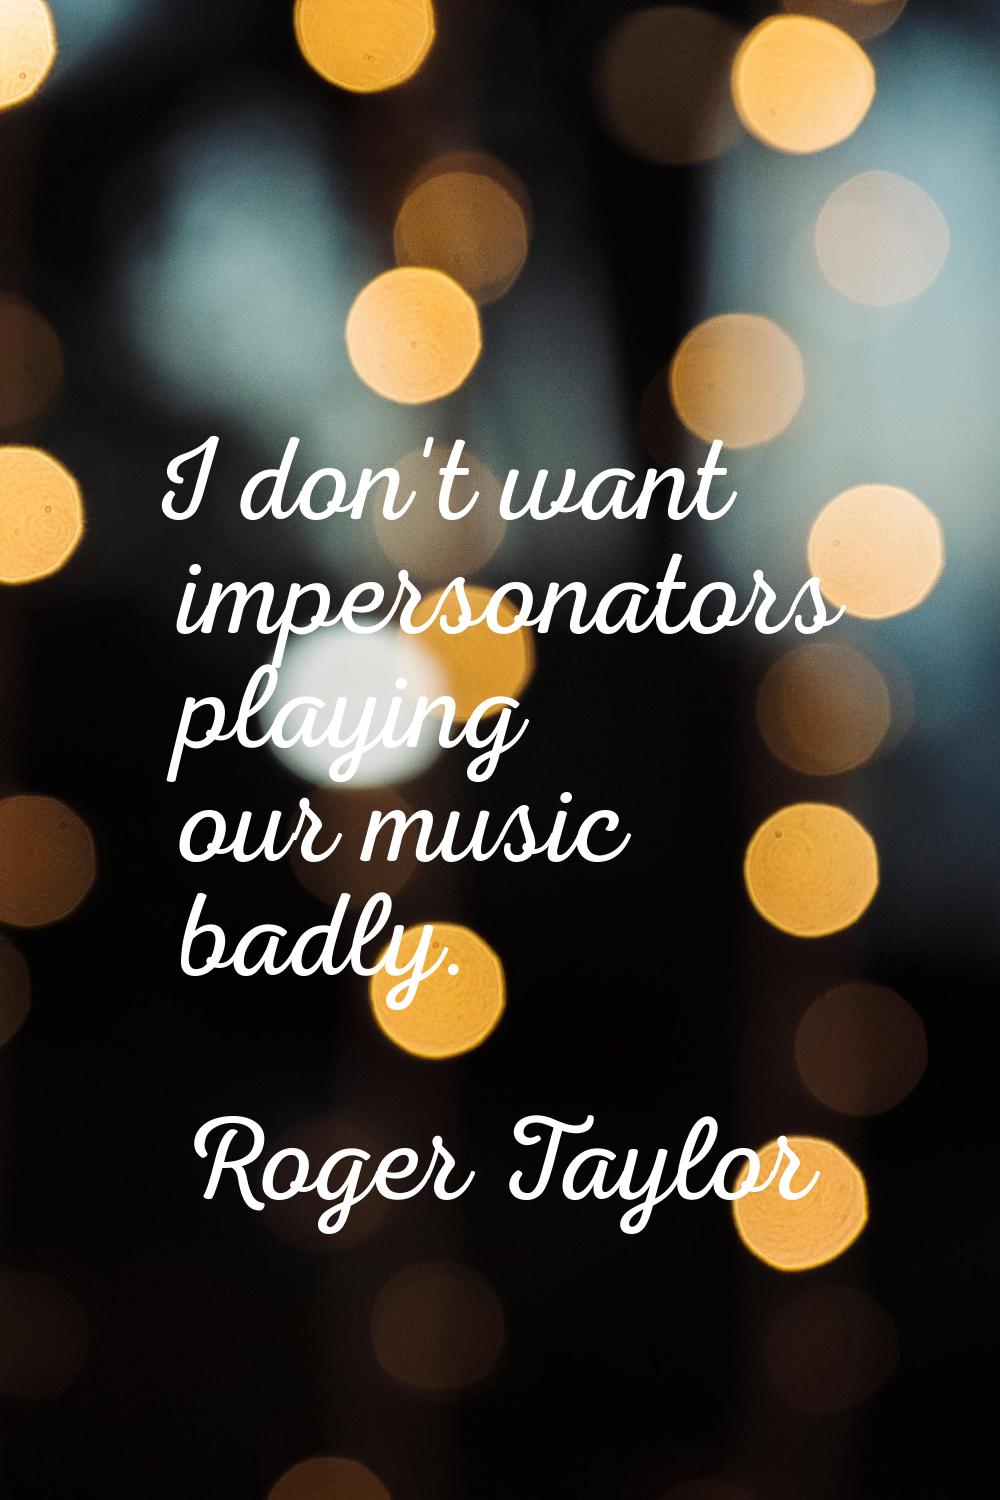 I don't want impersonators playing our music badly.